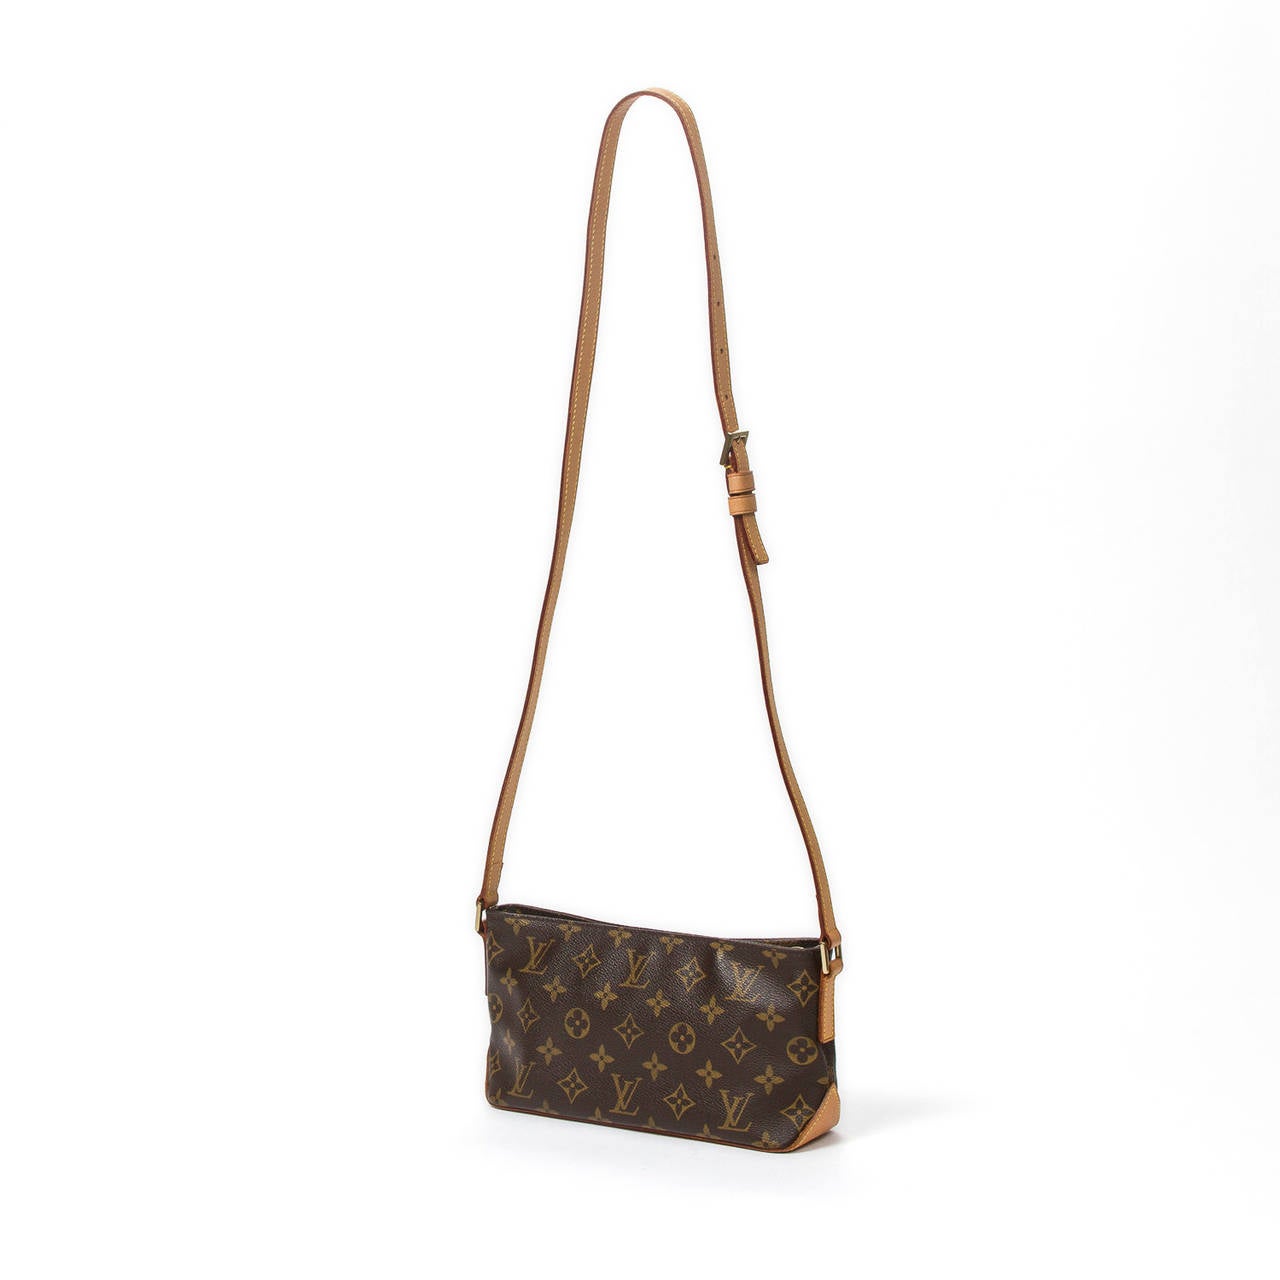 Louis Vuitton Trotteur in monogram canvas with adjustable vachetta leather shoulder strap, golden brass hardware. Brown canvas lined interior with zip pocket. Model of 2002. Date code SL1012. Streaks on the vachetta leather at the bottom of the bag,